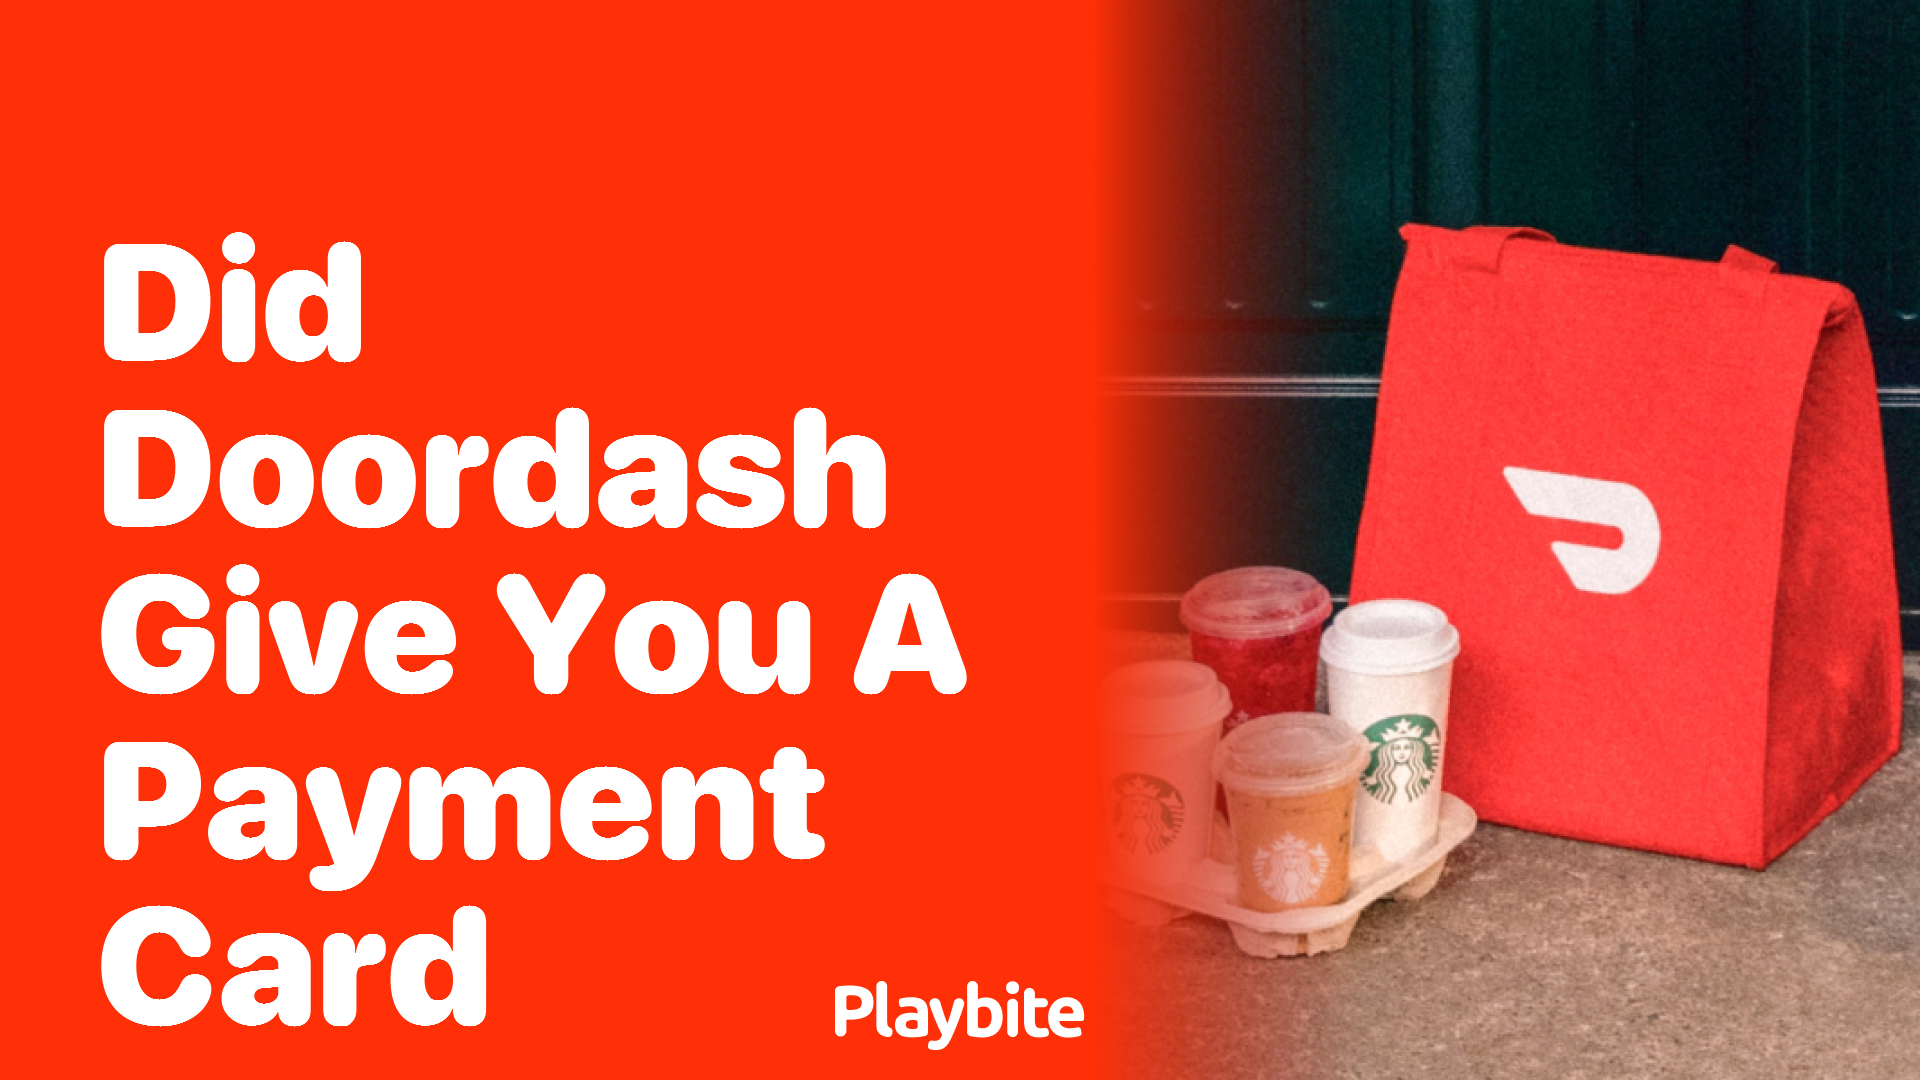 Did DoorDash Give You a Payment Card? Here’s What You Need to Know